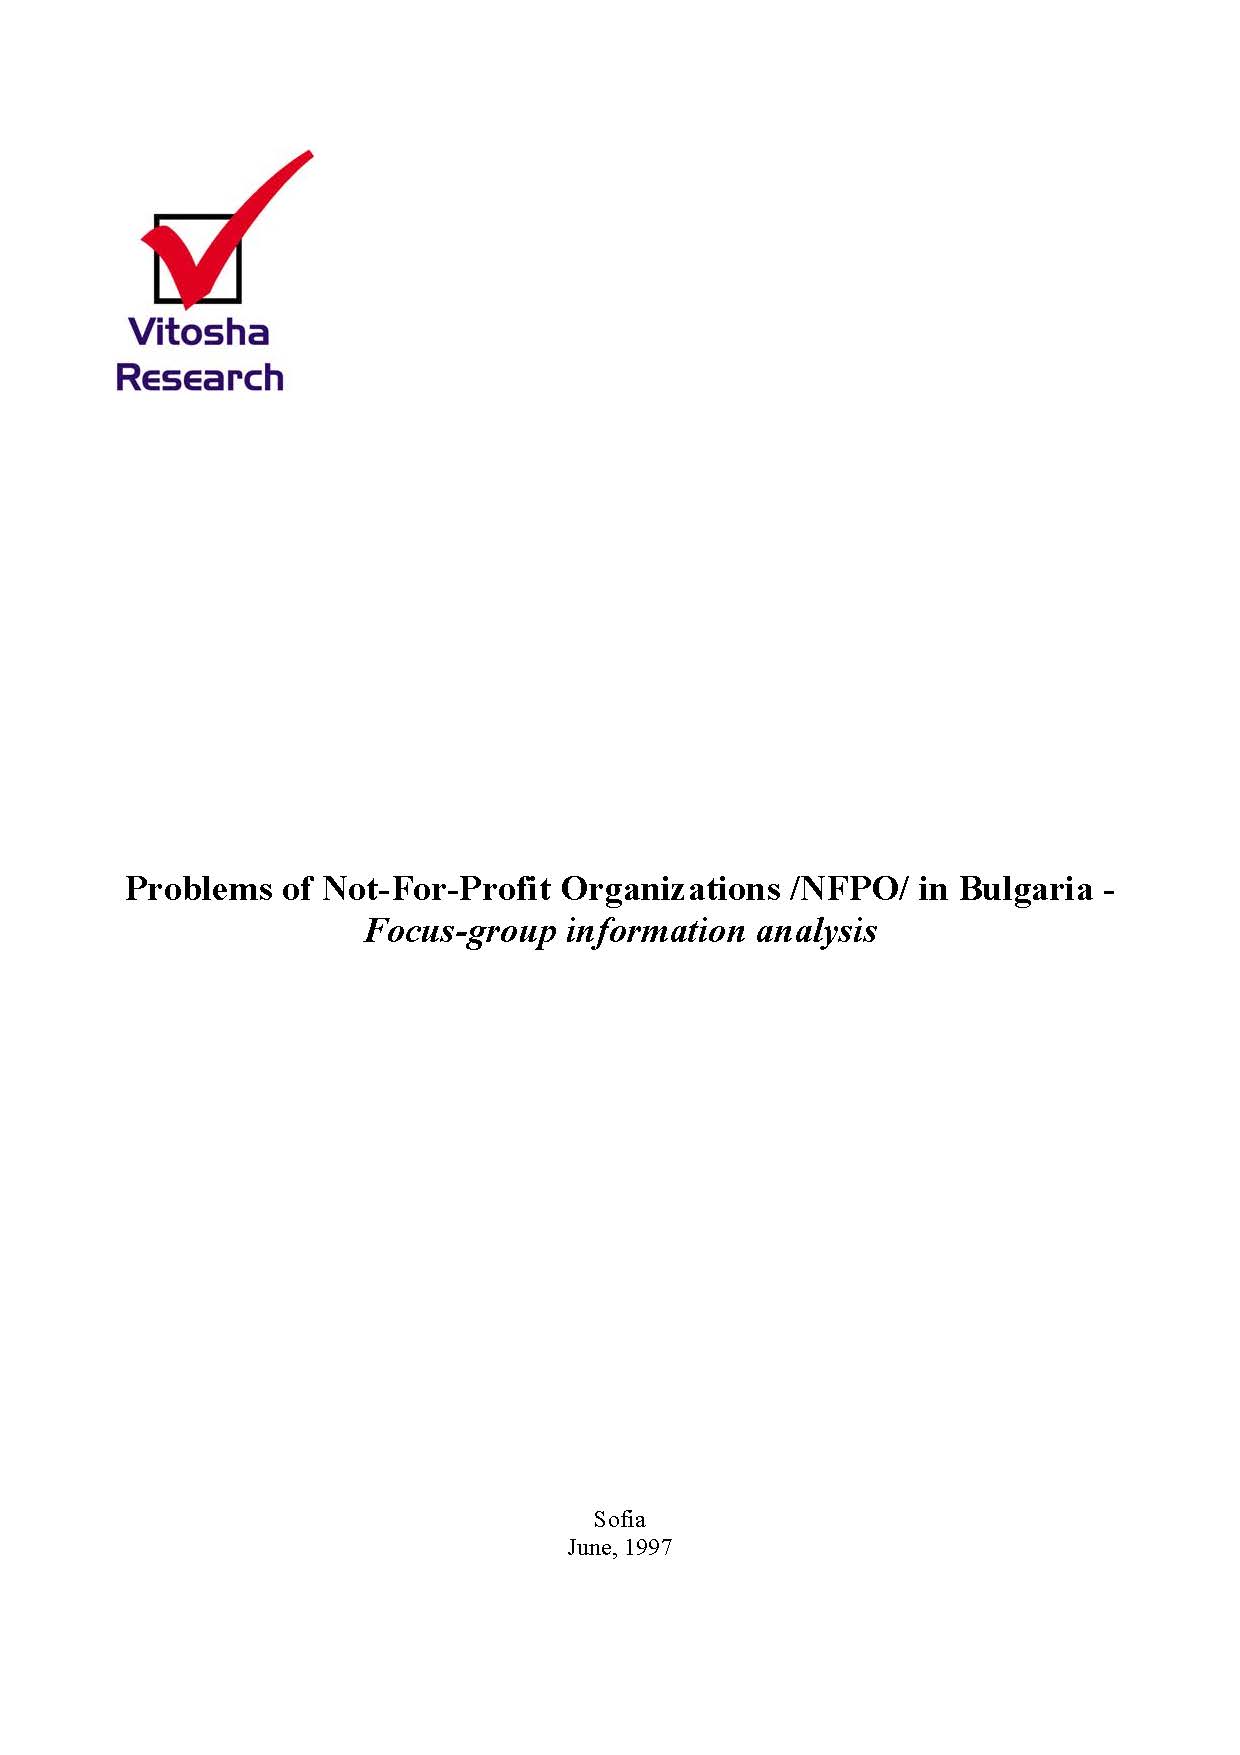 Problems of Not-For-Profit Organizations /NFPO/ in Bulgaria - Focus-group information analysis, June 1997